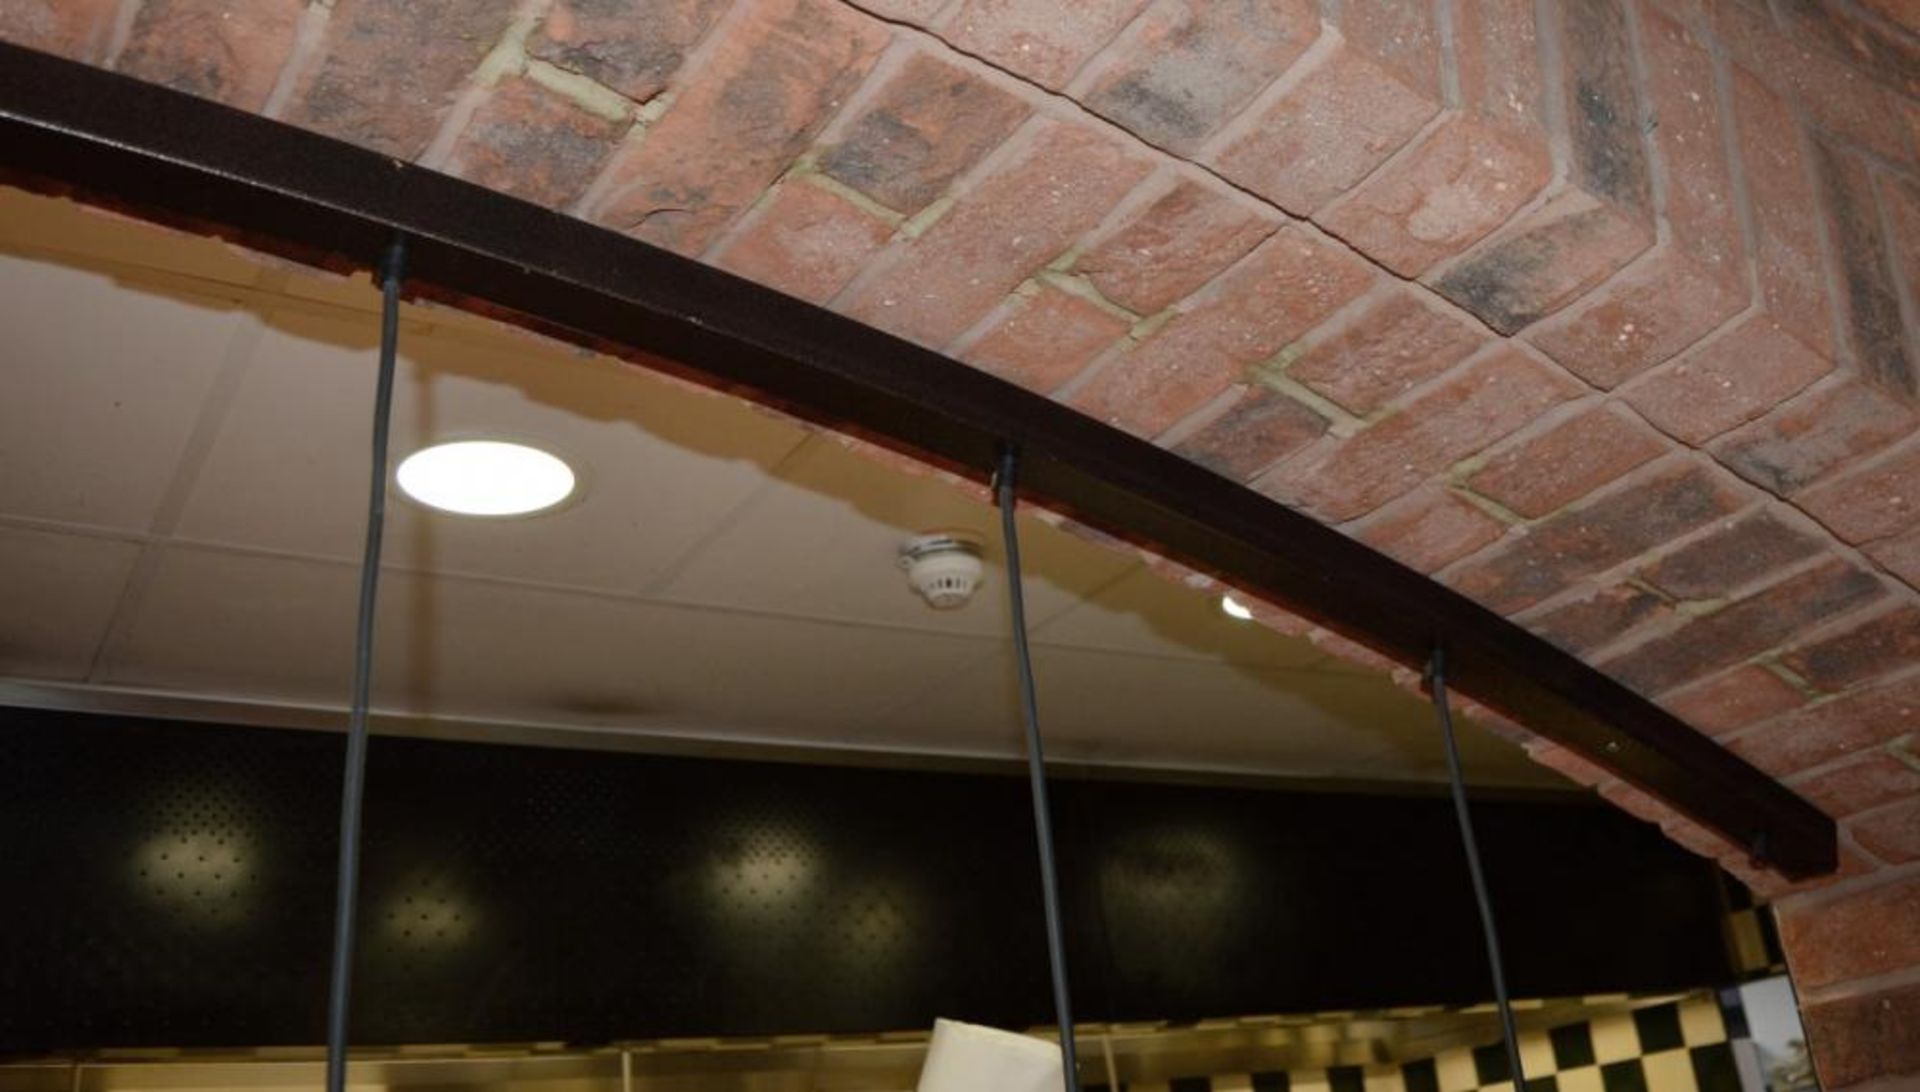 7 x Commercial Food Warming Heat Lamps With Curved Holding Rail - CL366 - Ref BB1085 - Location: Mil - Image 6 of 6